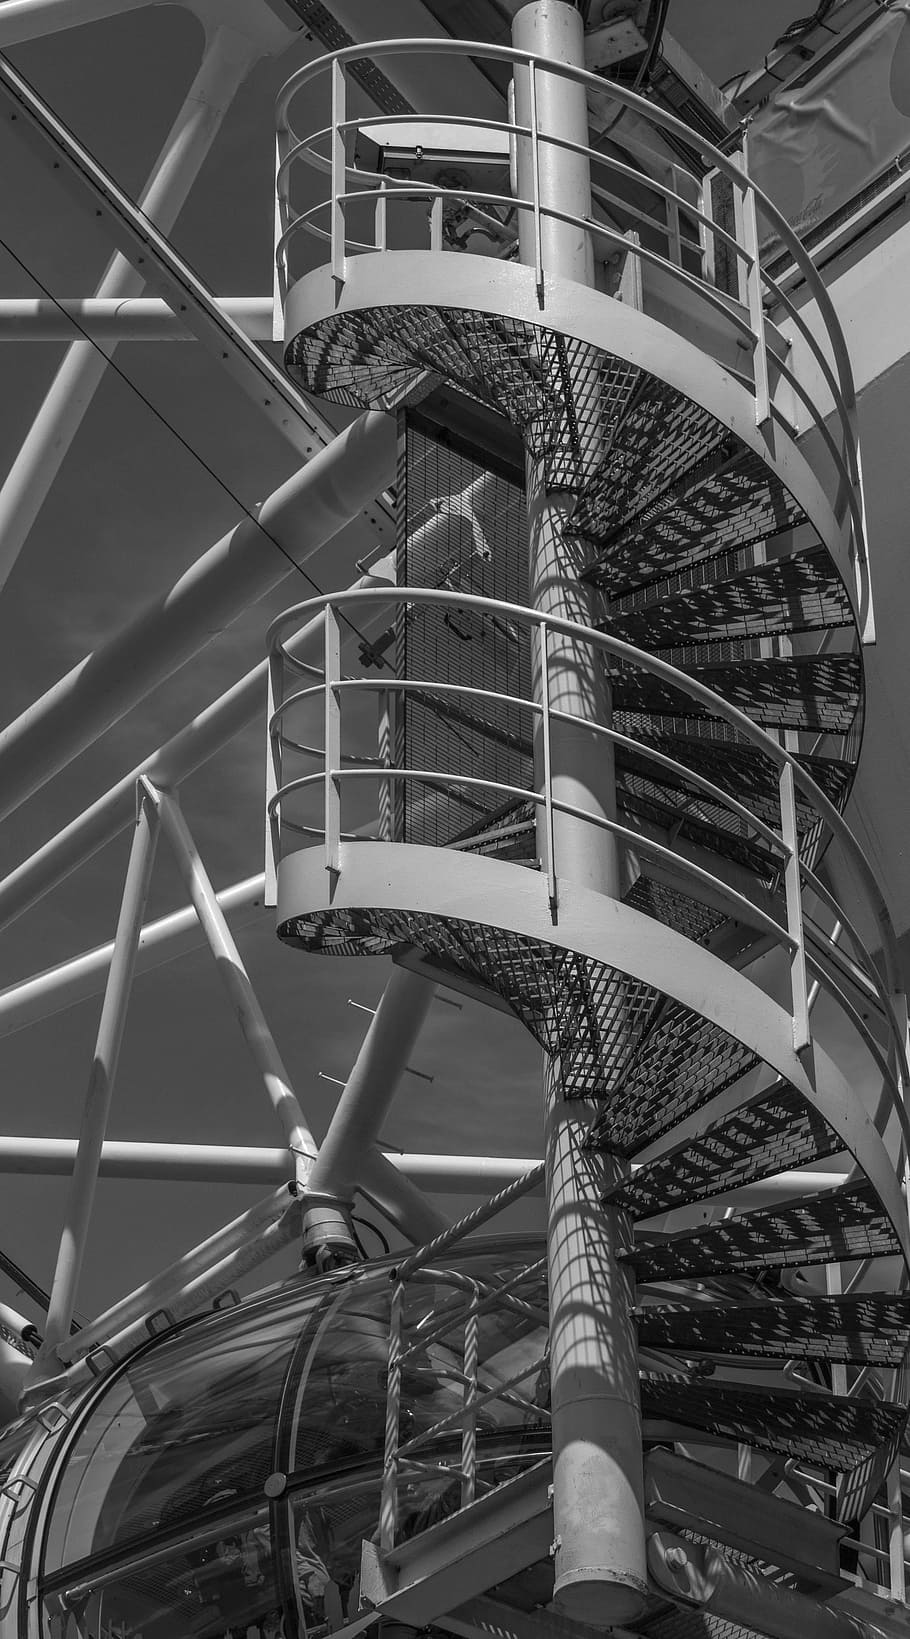 spiral staircase, black and white, london, thames, london eye, staircase, spiral, black, white, architecture